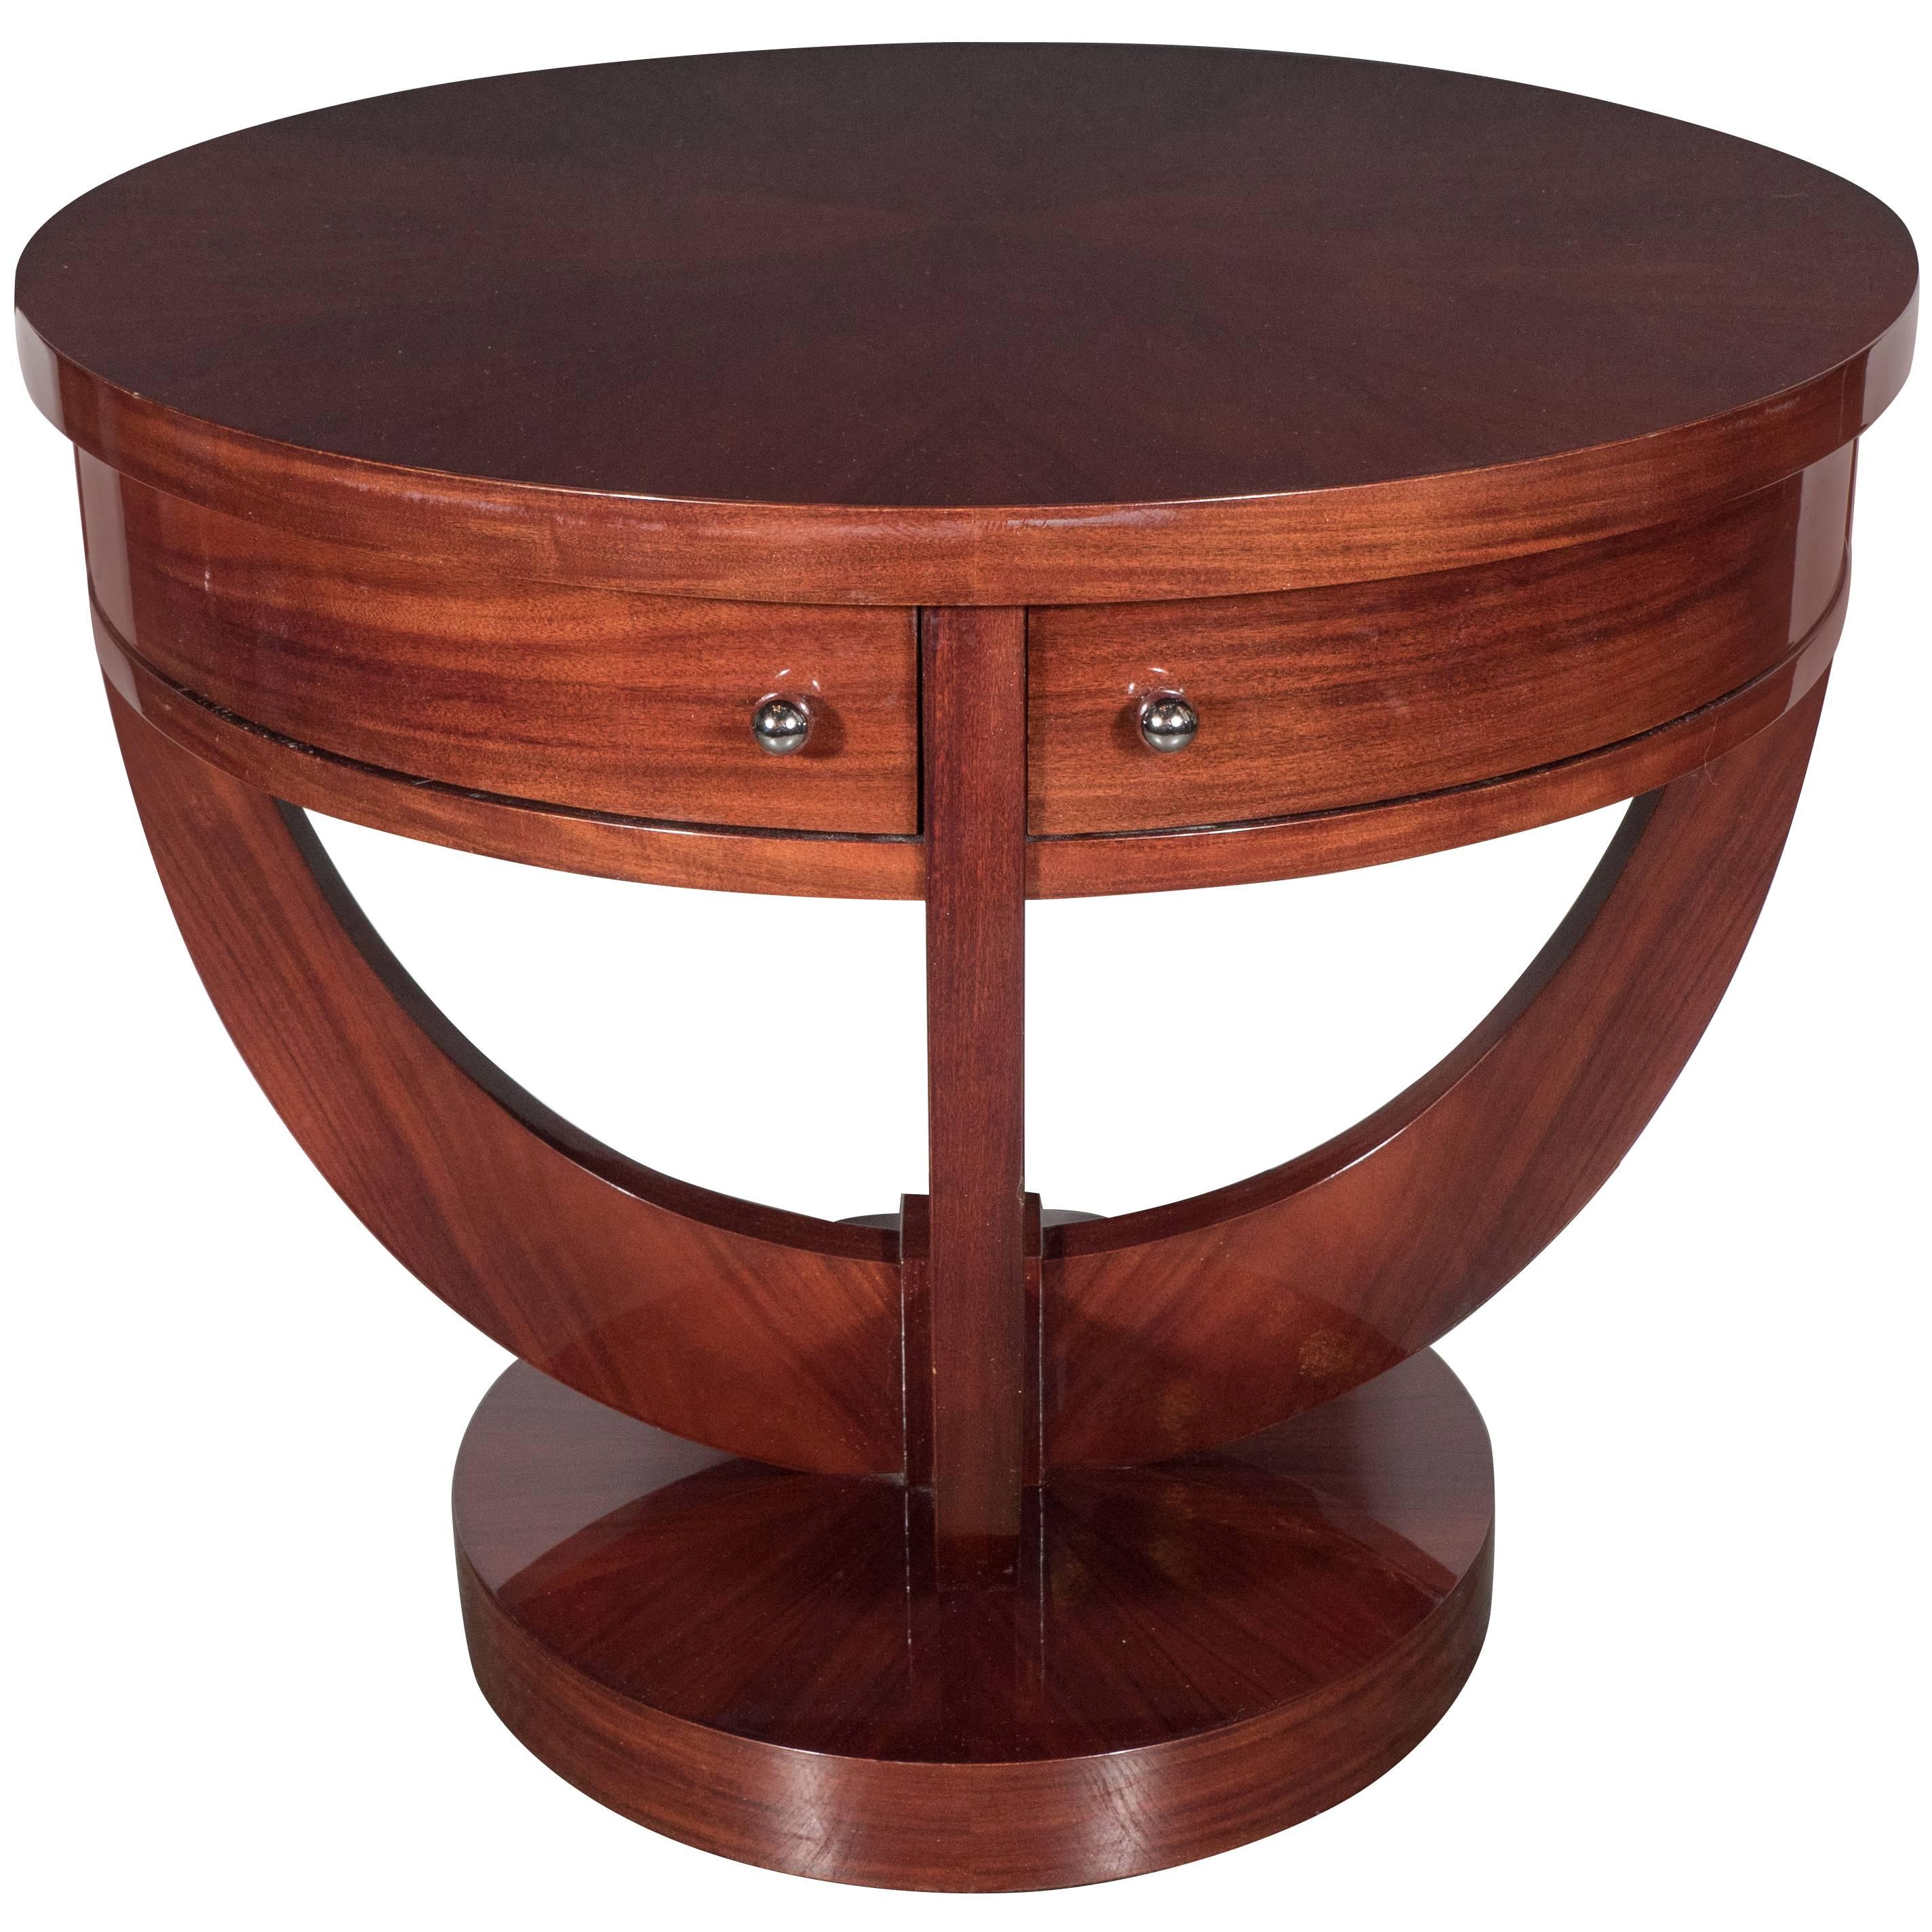 Art Deco Guerin Compass-Style Table in Book-Matched Mahogany and Chrome Pulls